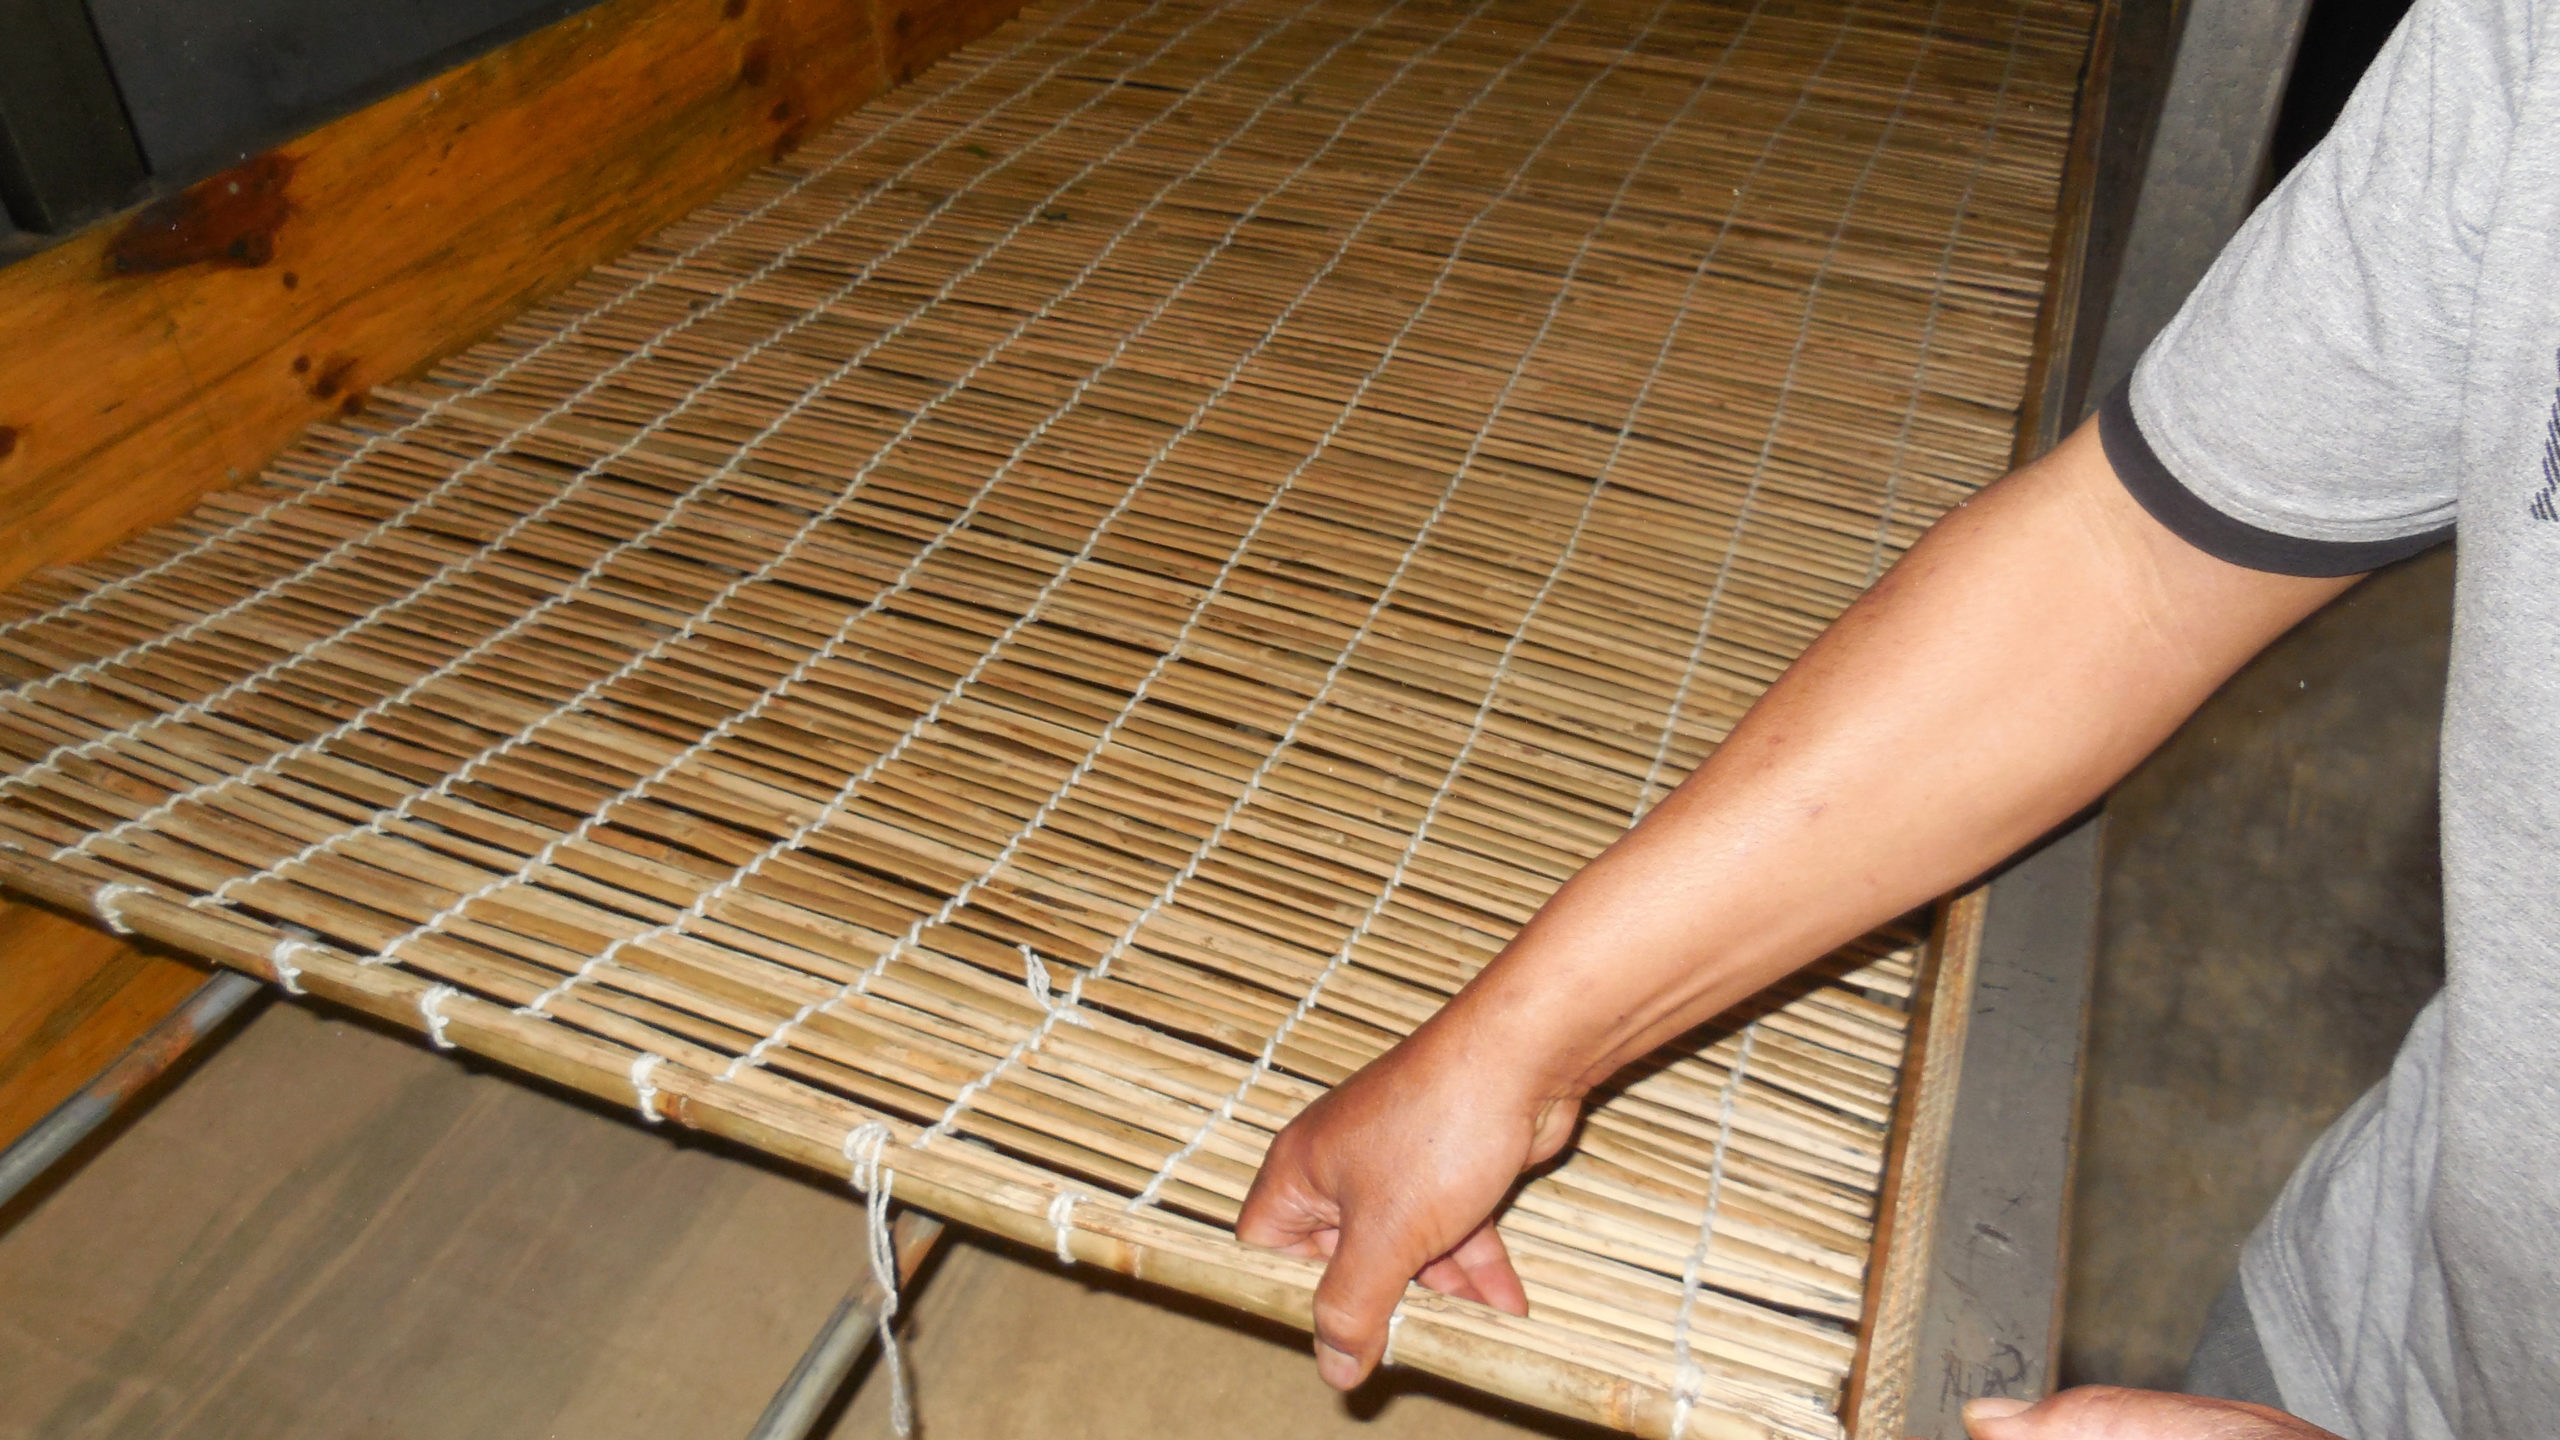 Laying a woven bamboo mat across bars in the upper part of the trough so that there is still space underneath it.